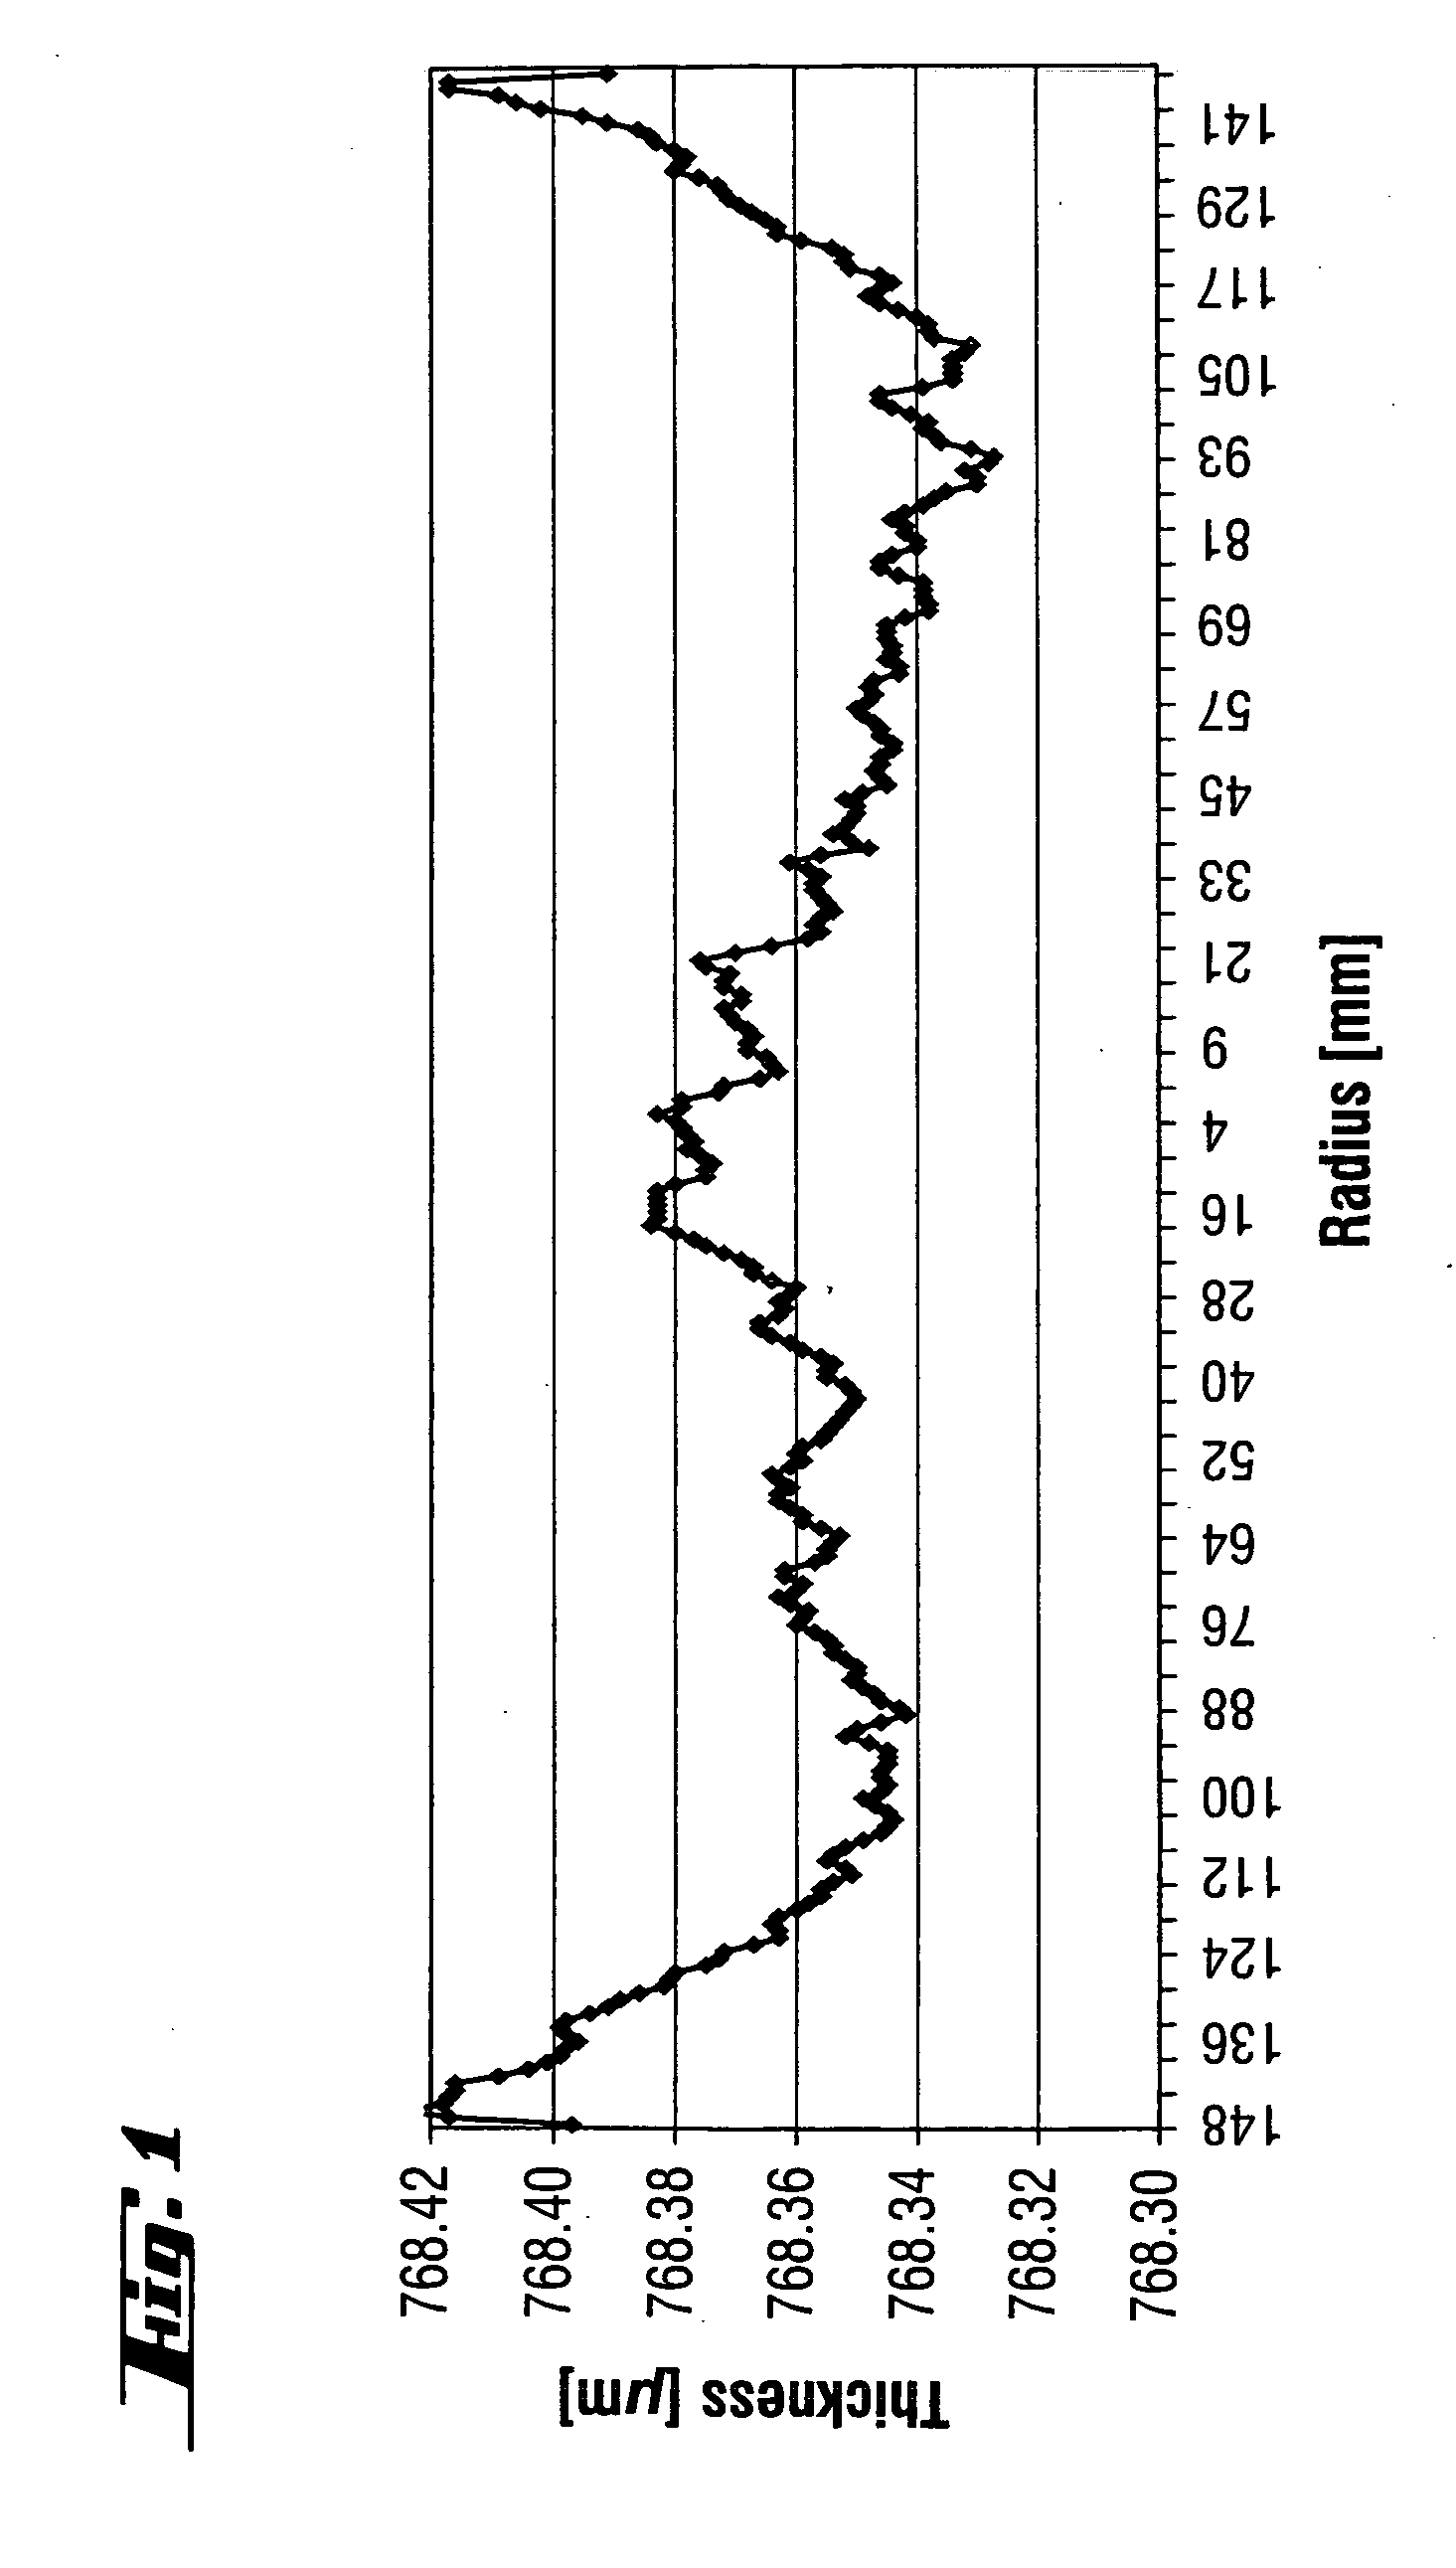 Epitaxially coated silicon wafer and method for producing epitaxially coated silicon wafers